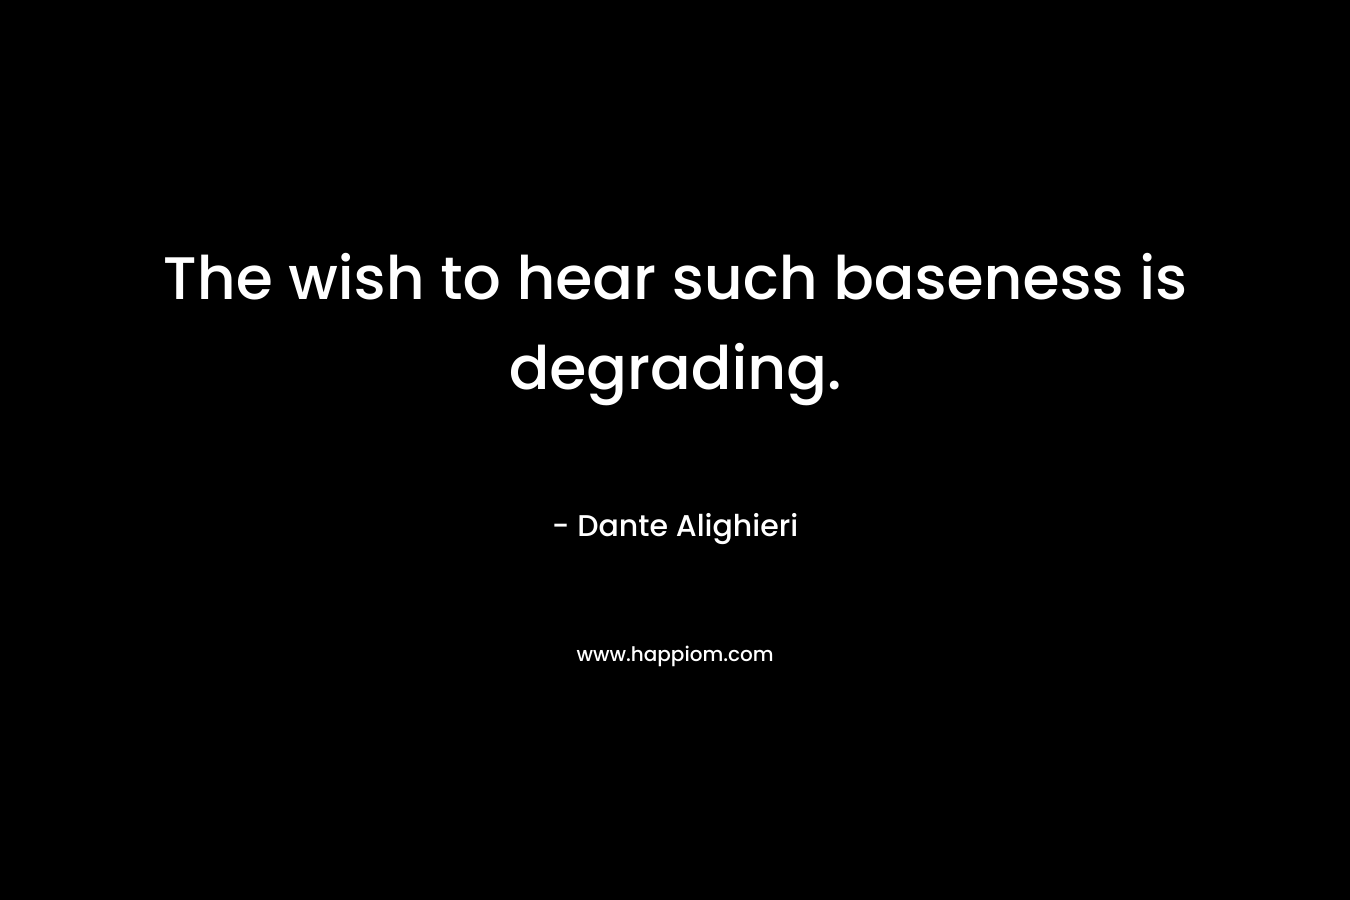 The wish to hear such baseness is degrading. – Dante Alighieri